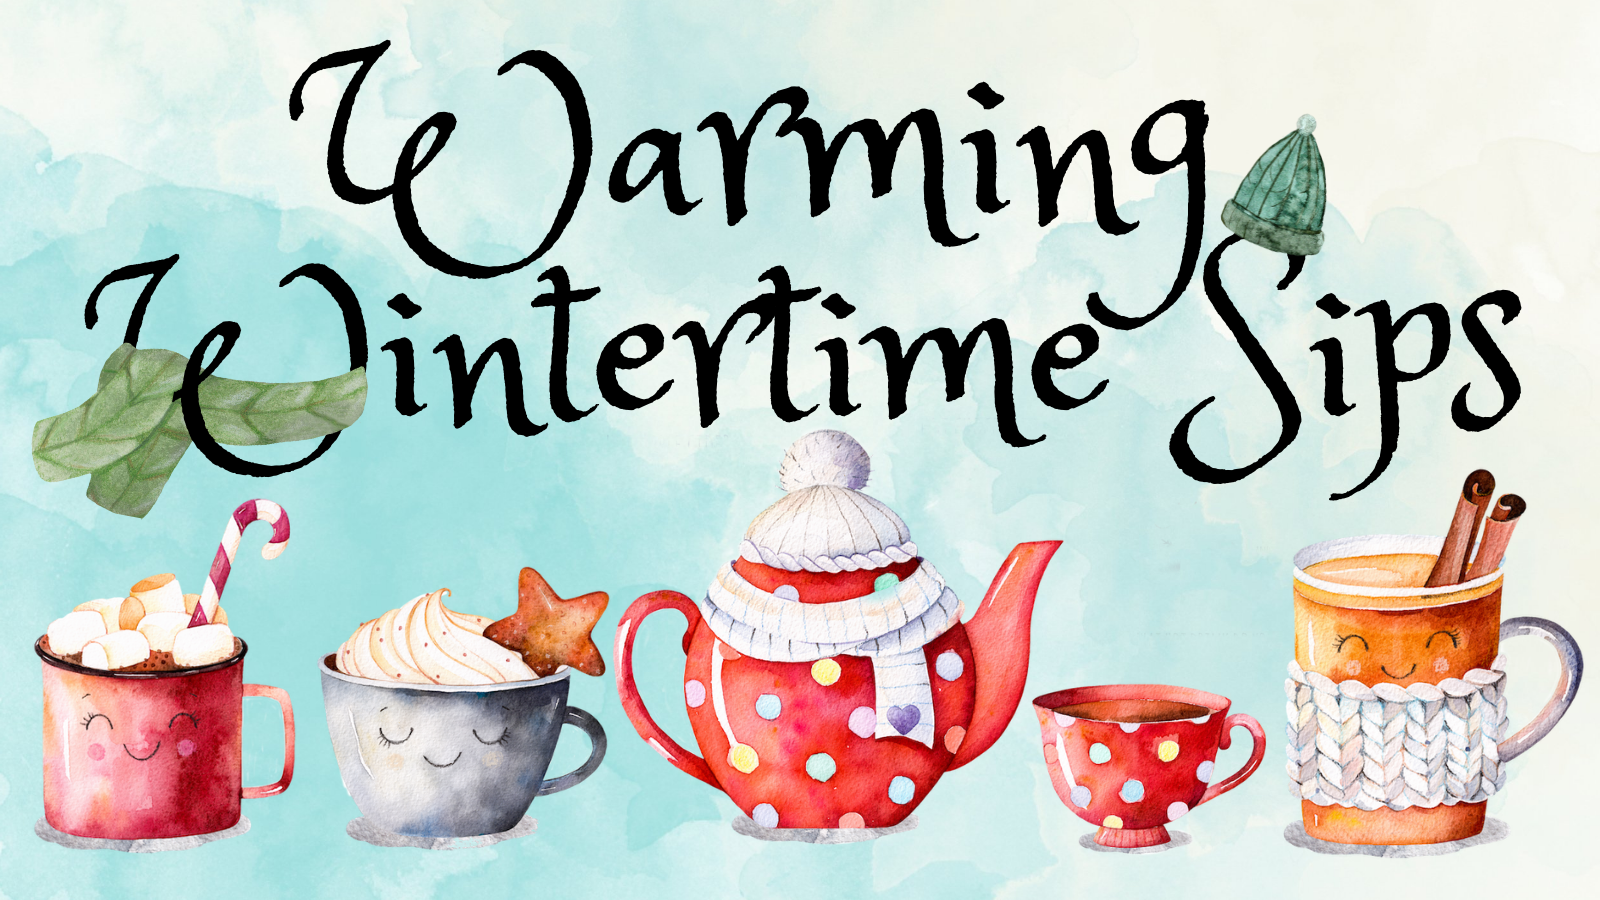 "Warming Wintertime Sips" with watercolor illustrations of a teapot, teacups and mugs of warm drinks